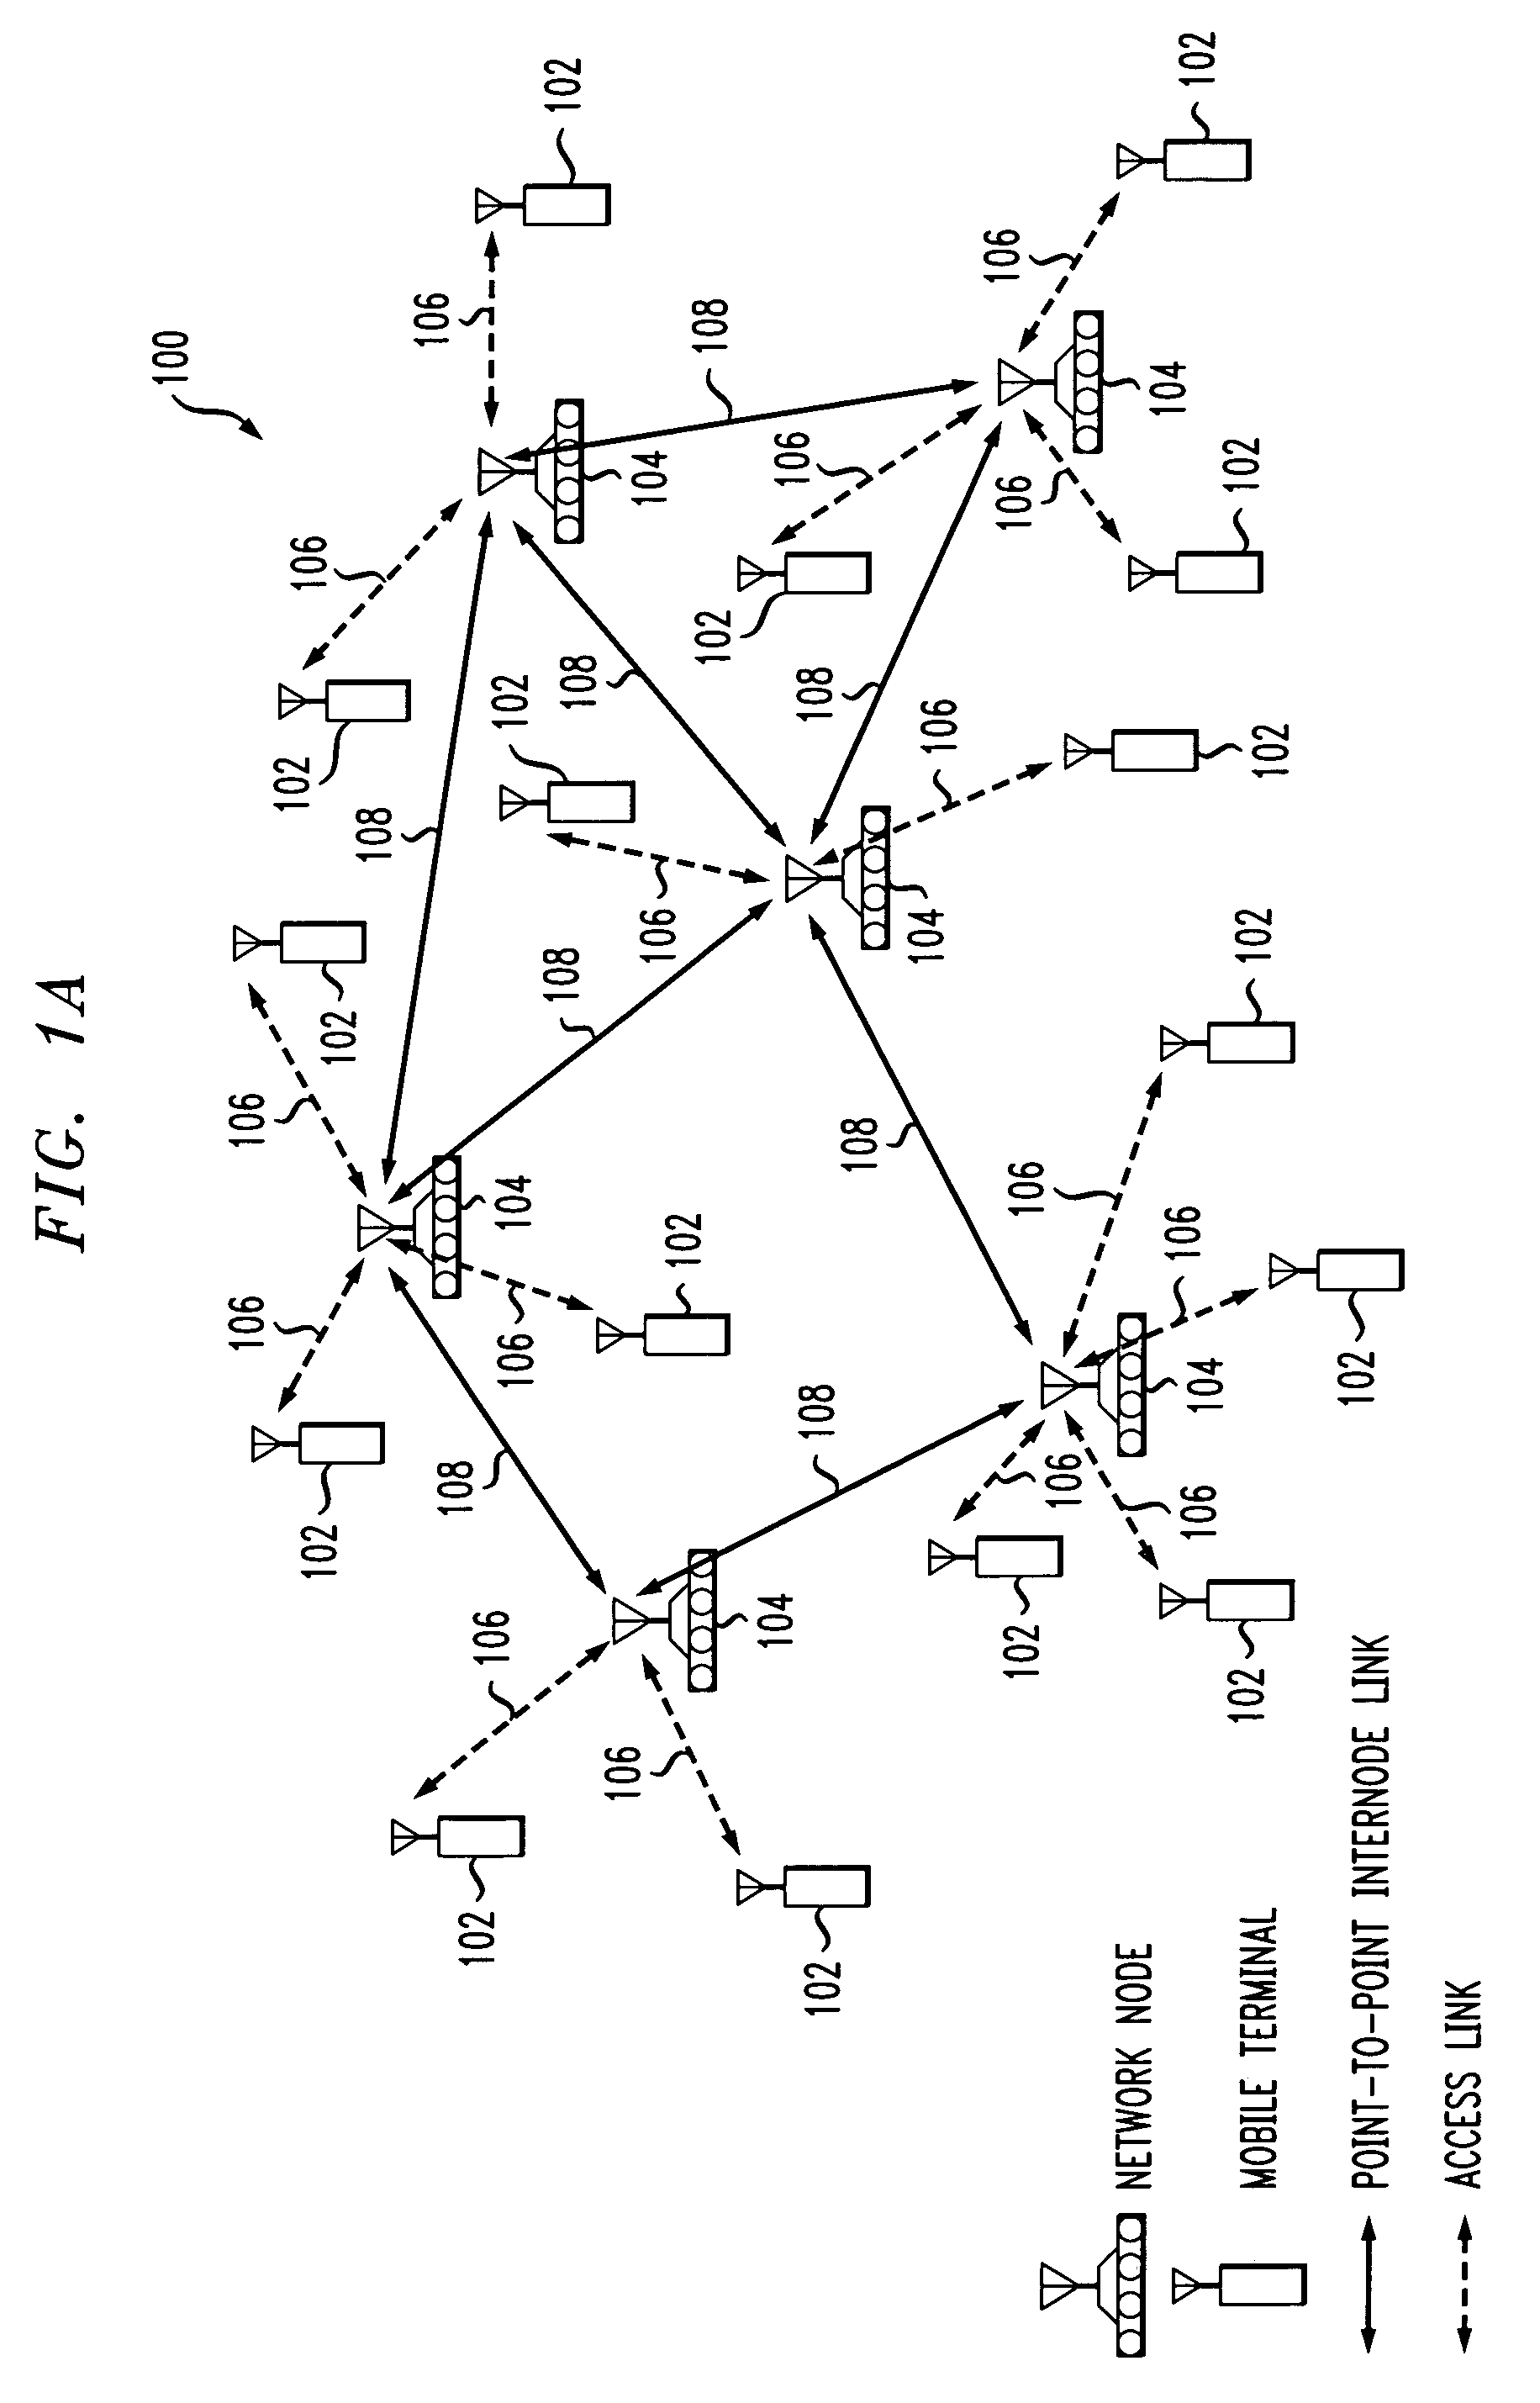 Methods and apparatus for topology sensing in networks with mobile nodes